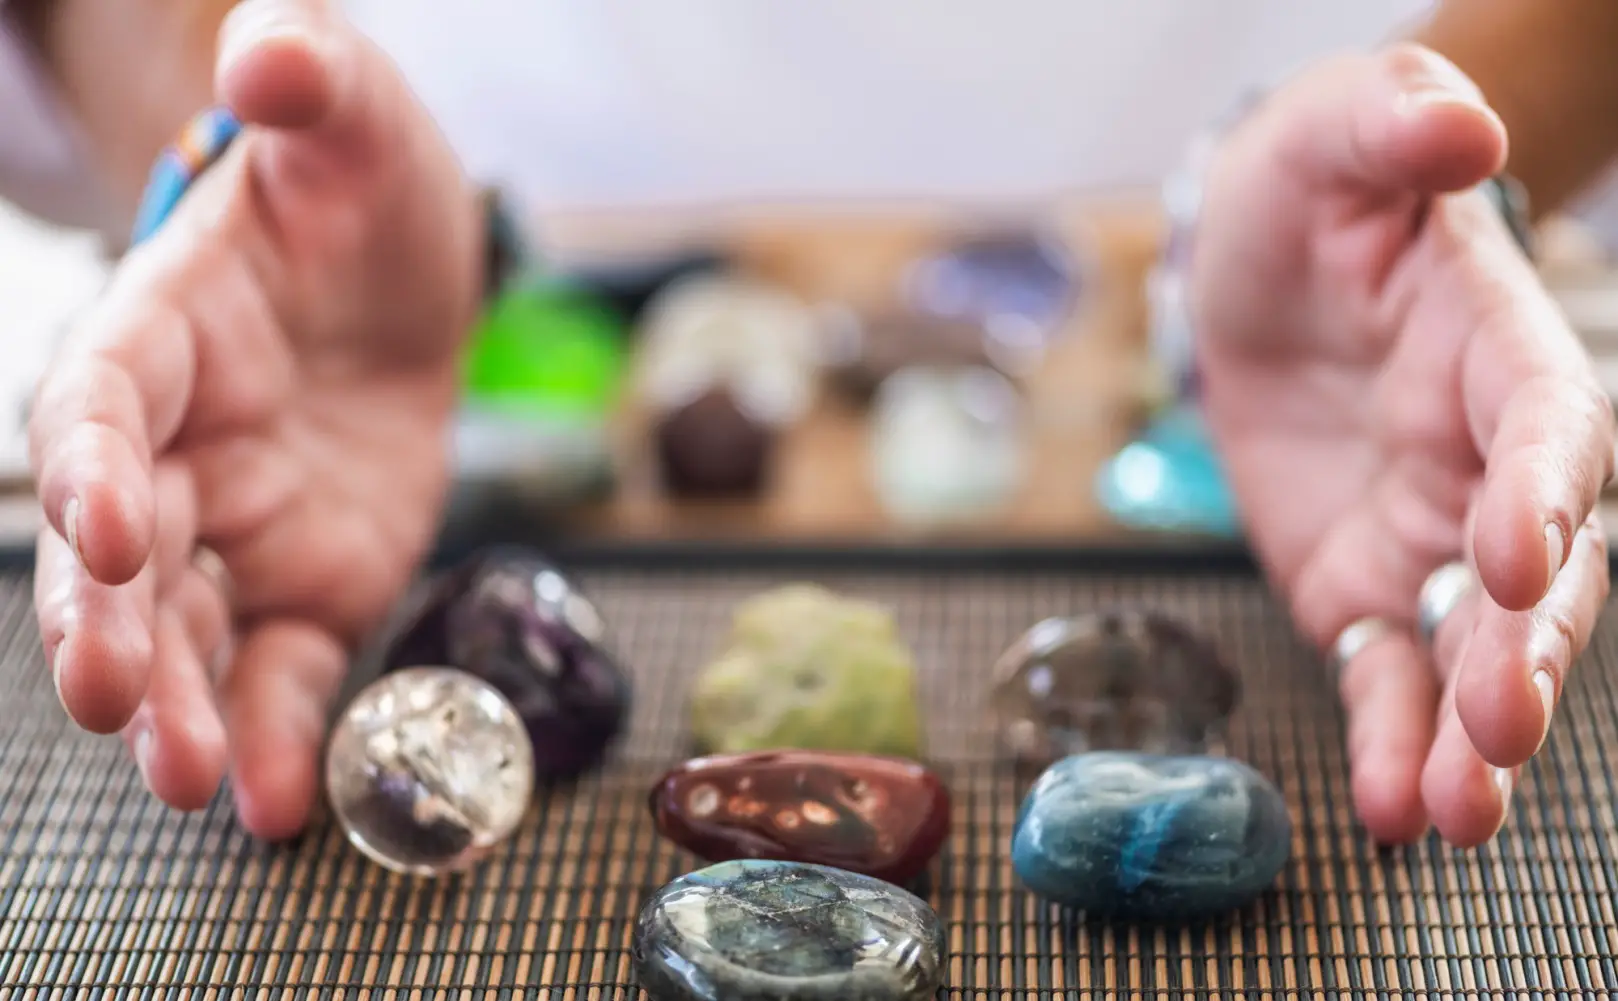 7 Benefits Of Crystal Energy For Love And Luck That May Change Your Perspective